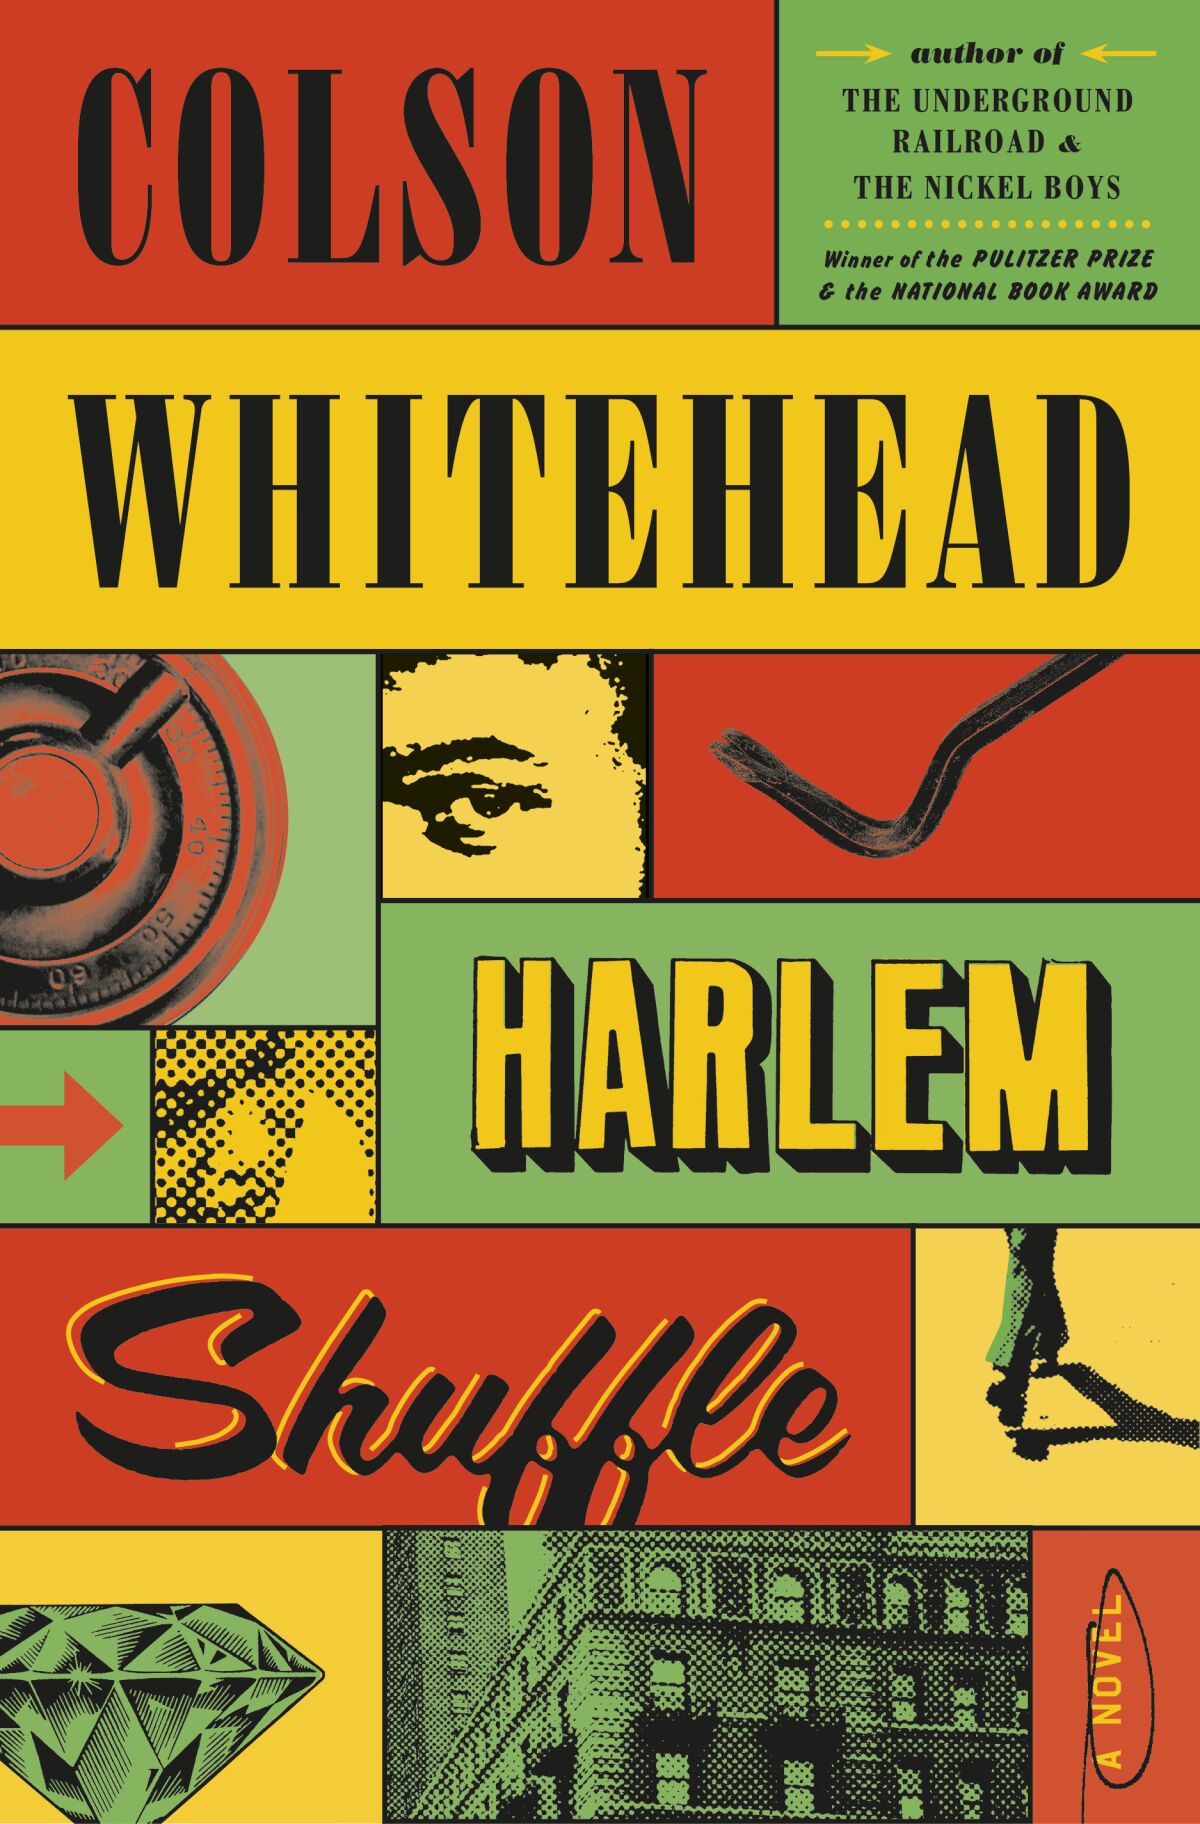 This cover image released by Doubleday shows "Harlem Shuffle" by Colson Whitehead, releasing Sept. 14. (Doubleday via AP)